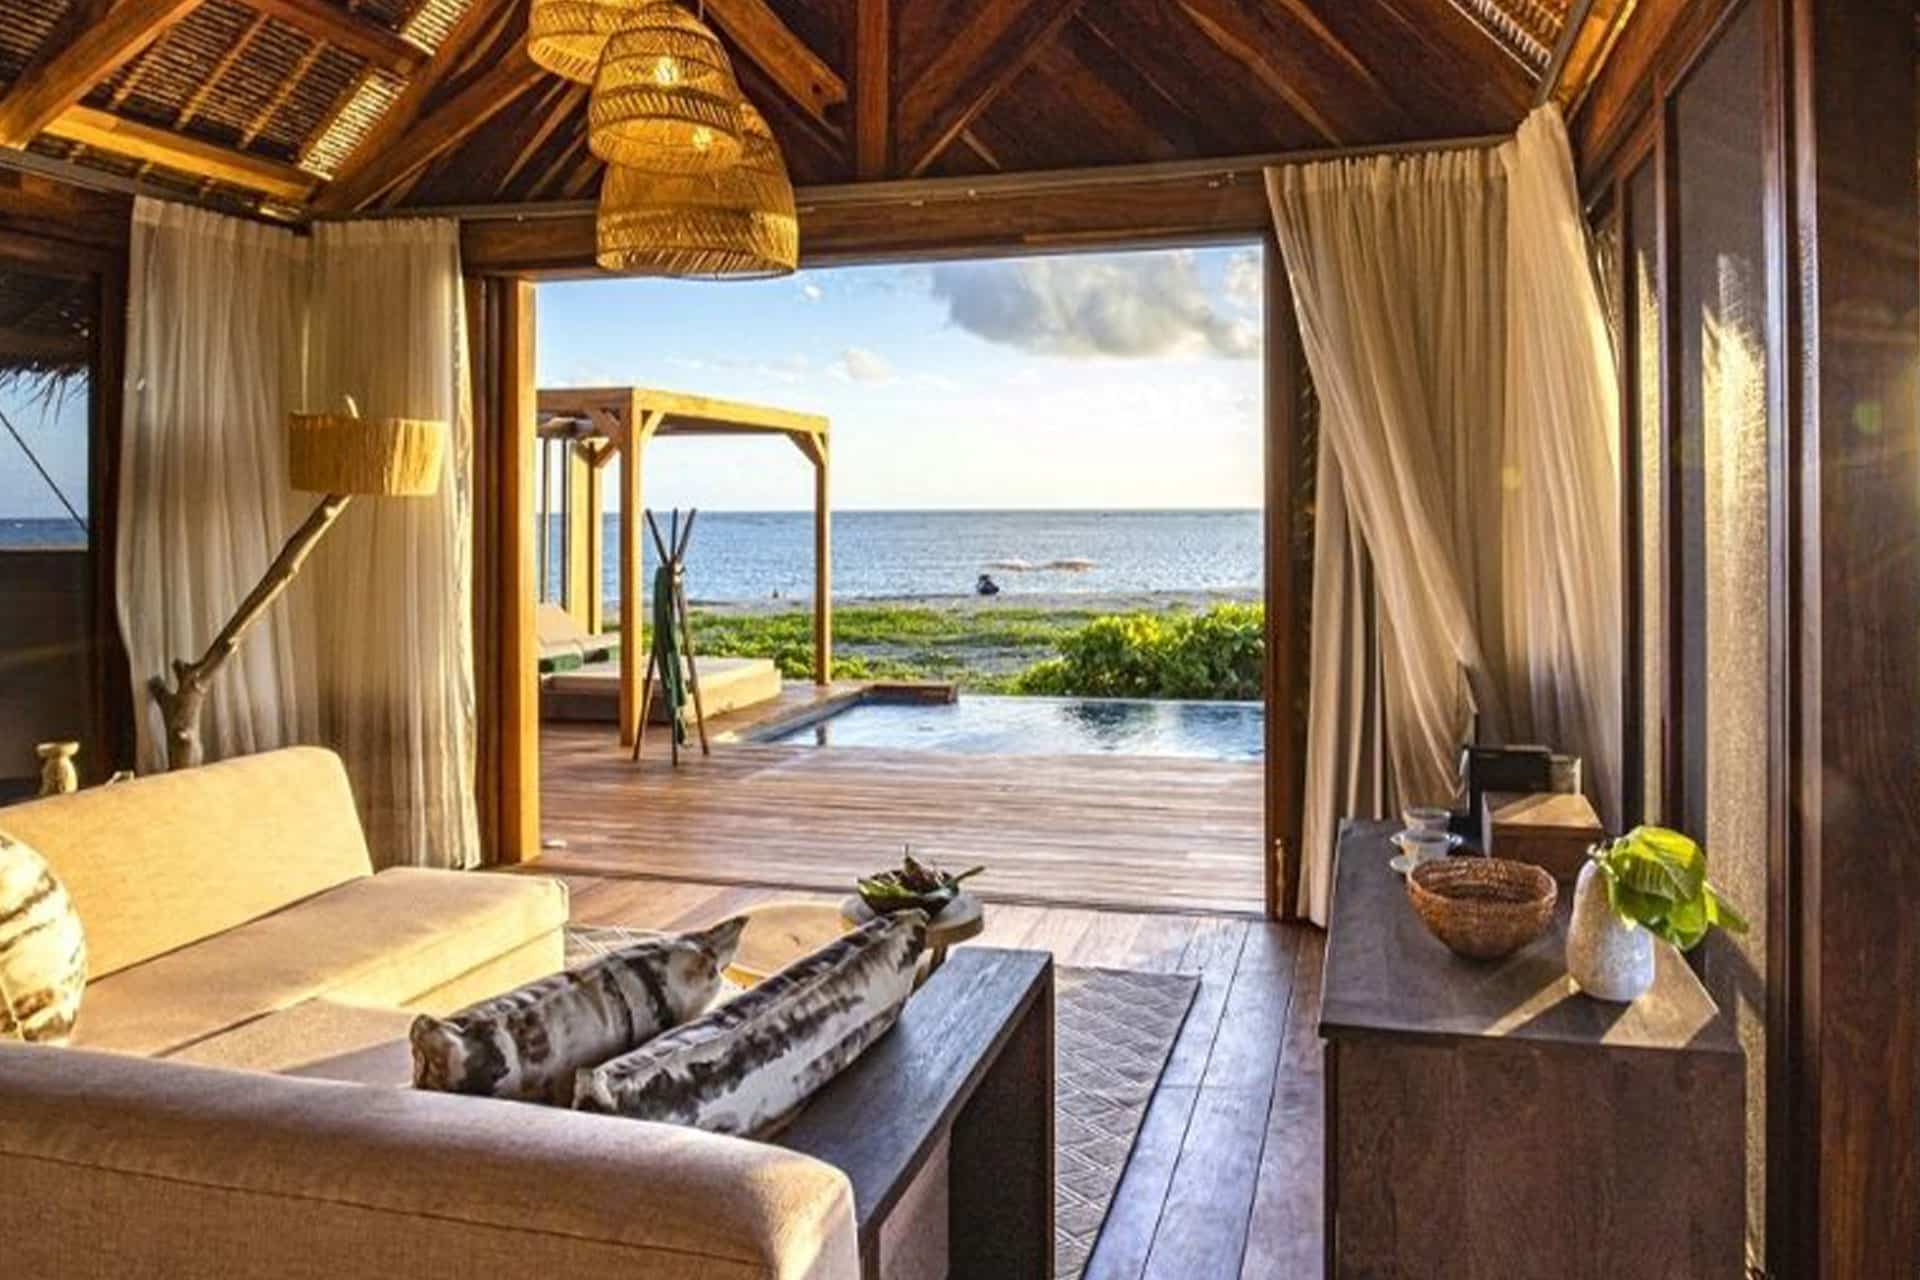 View of the ocean and a private pool from a villa at Banyan Tree Ilha Caldeira in Mozambique.